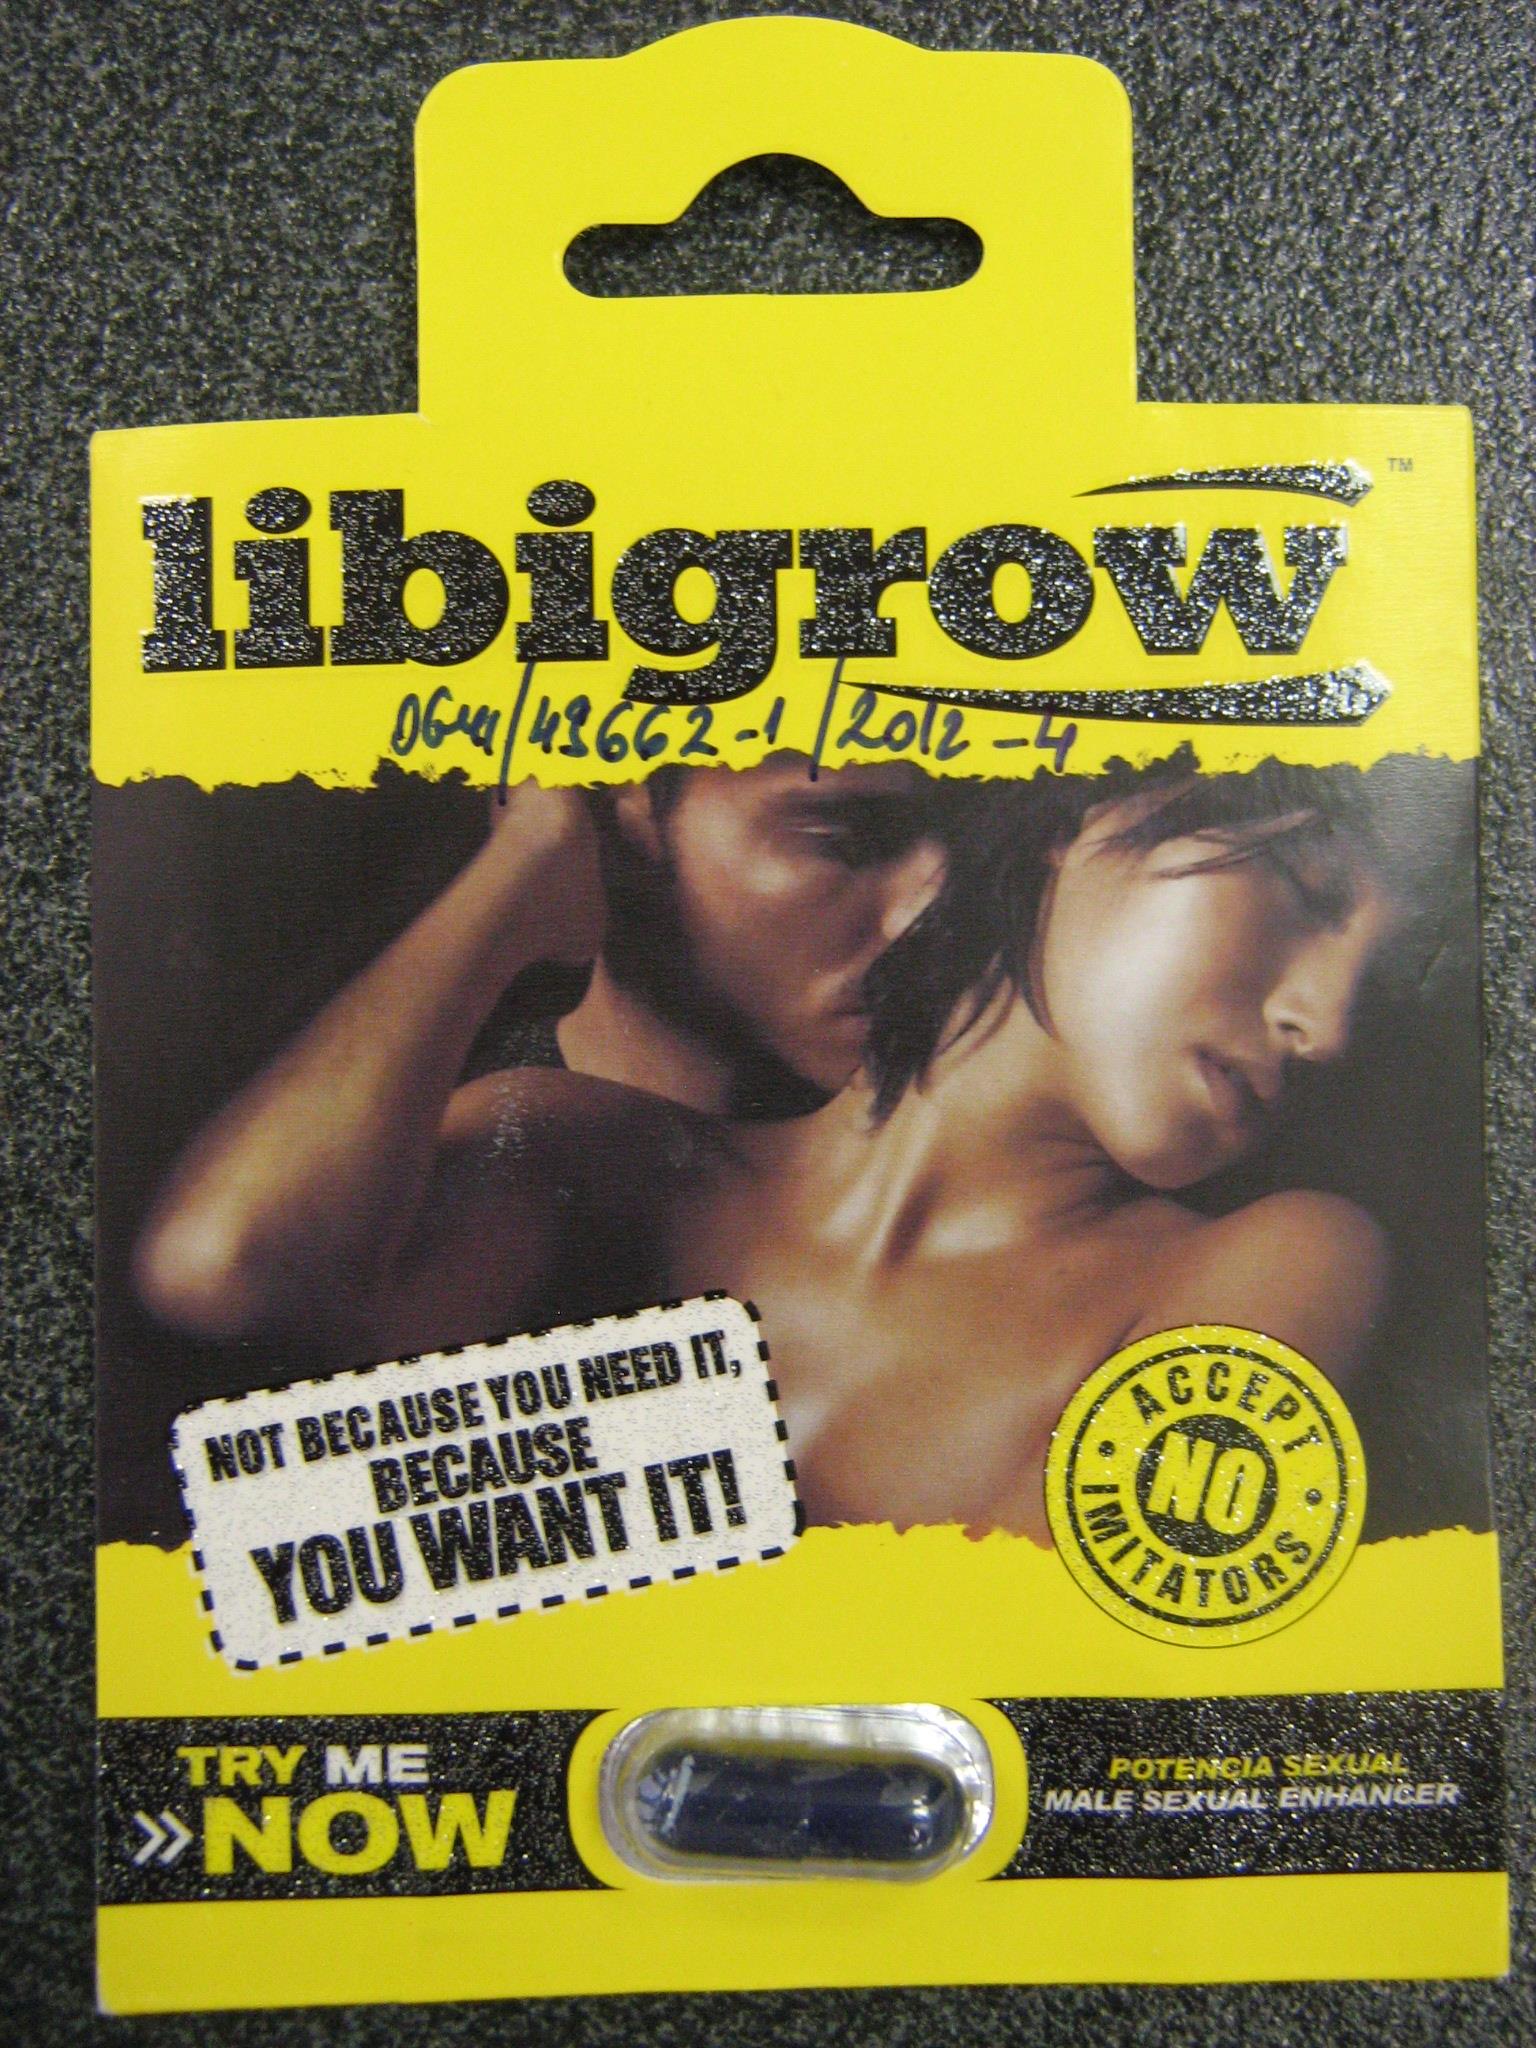 Image of the illigal product: Libigrow